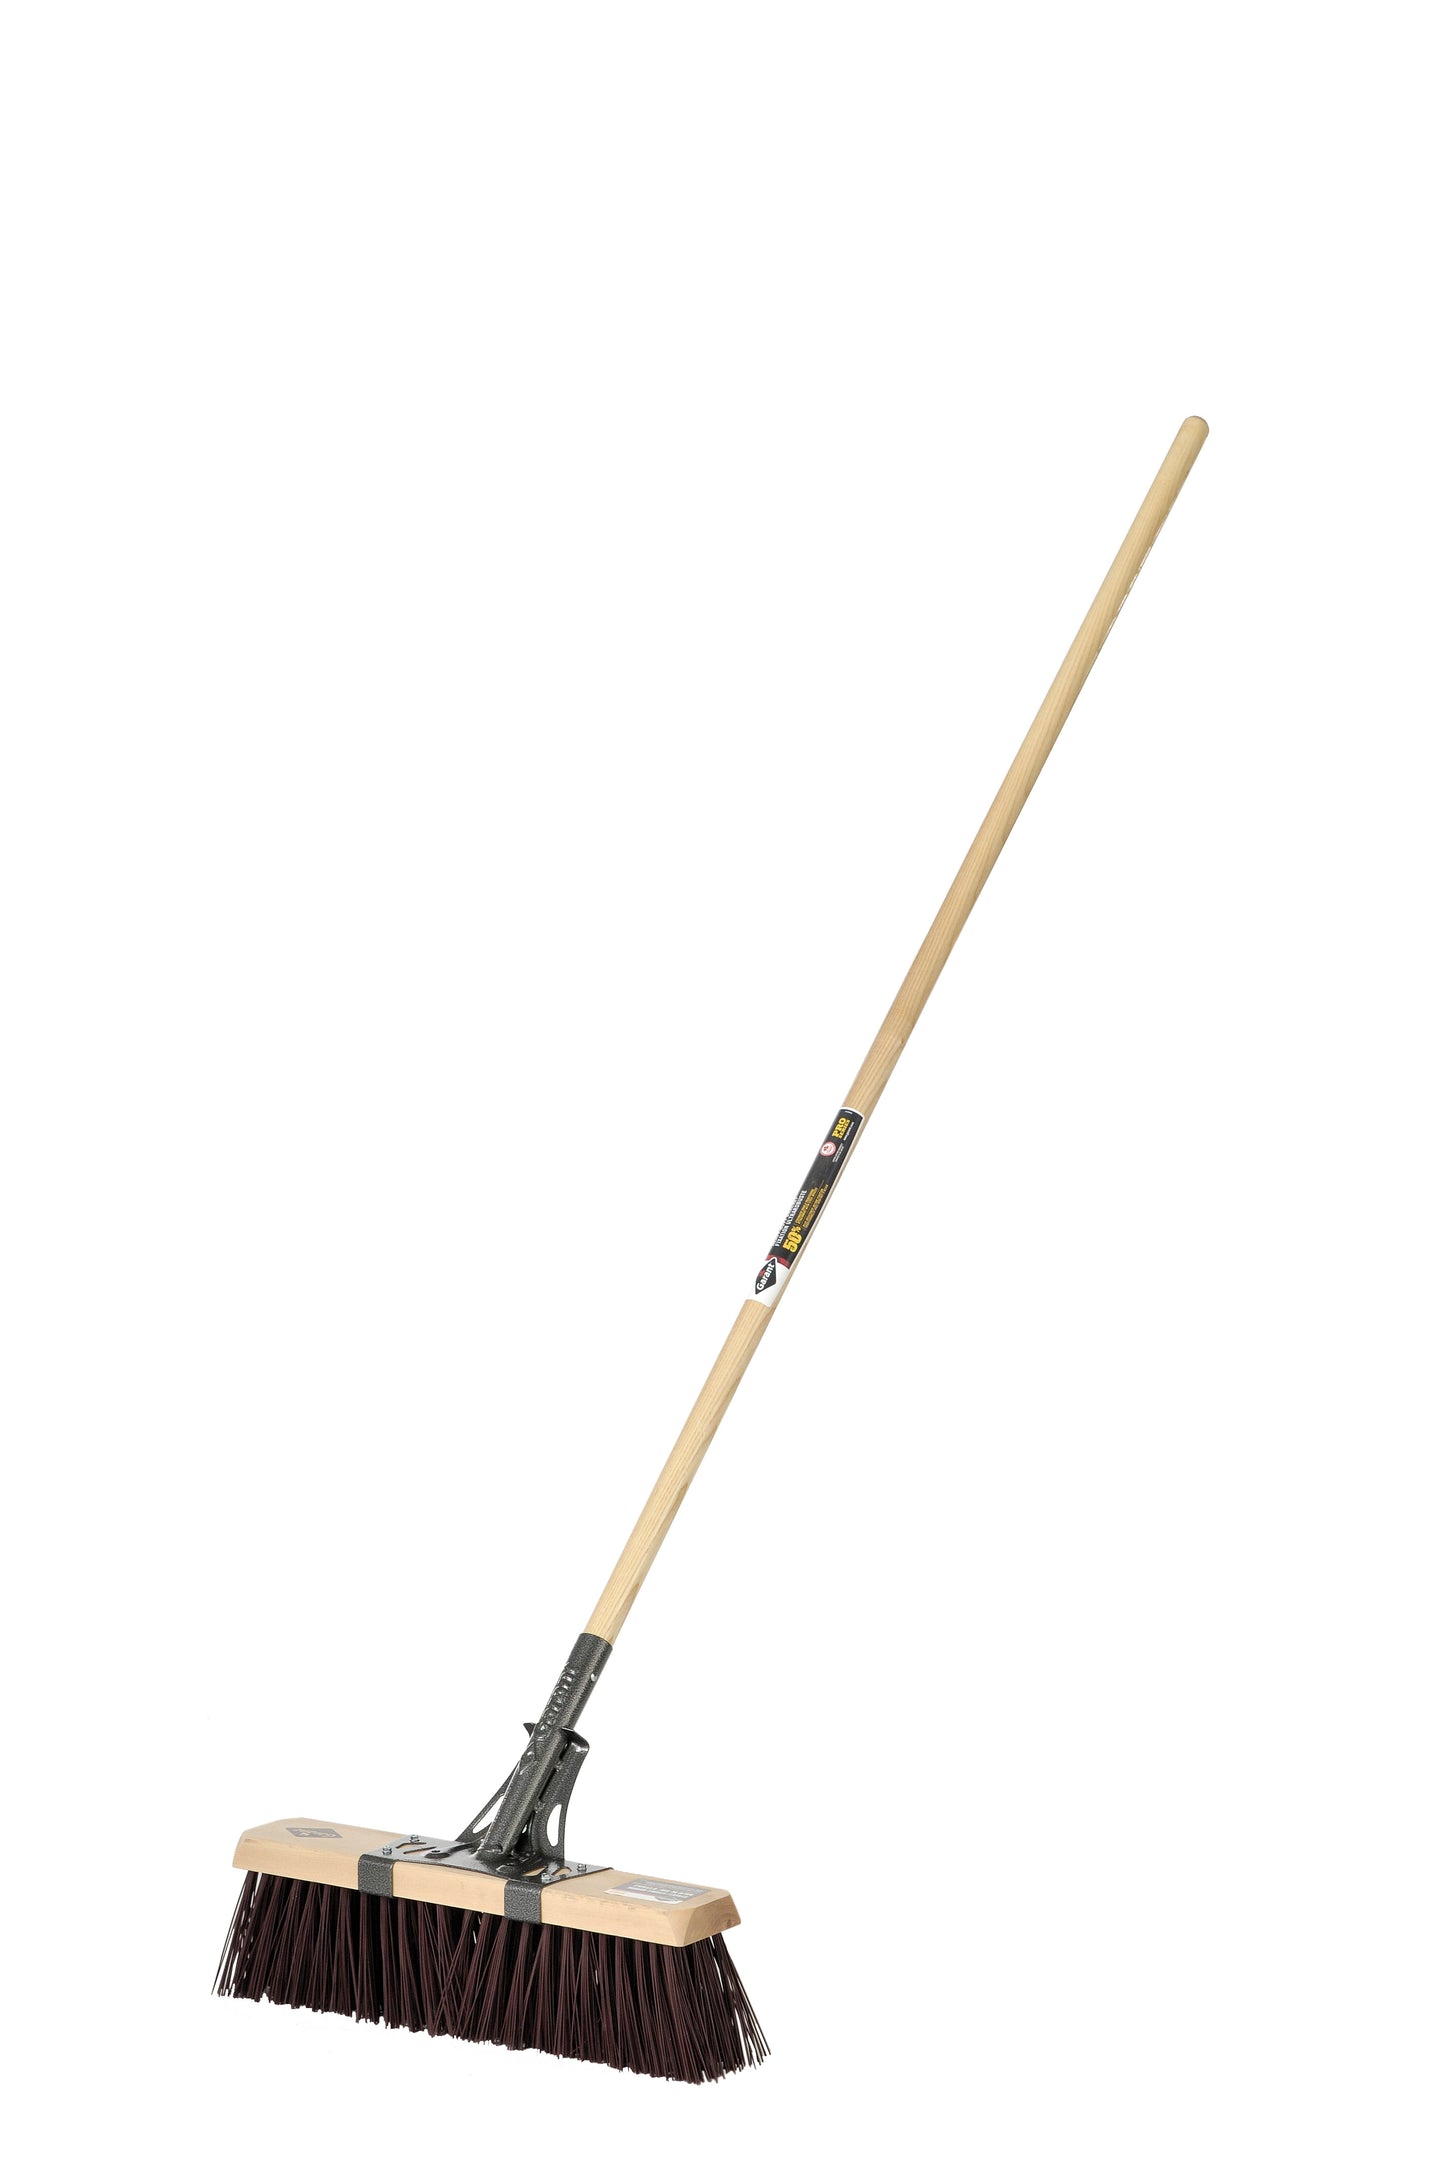 Street/stable broom 18", synthetic, wood hdle